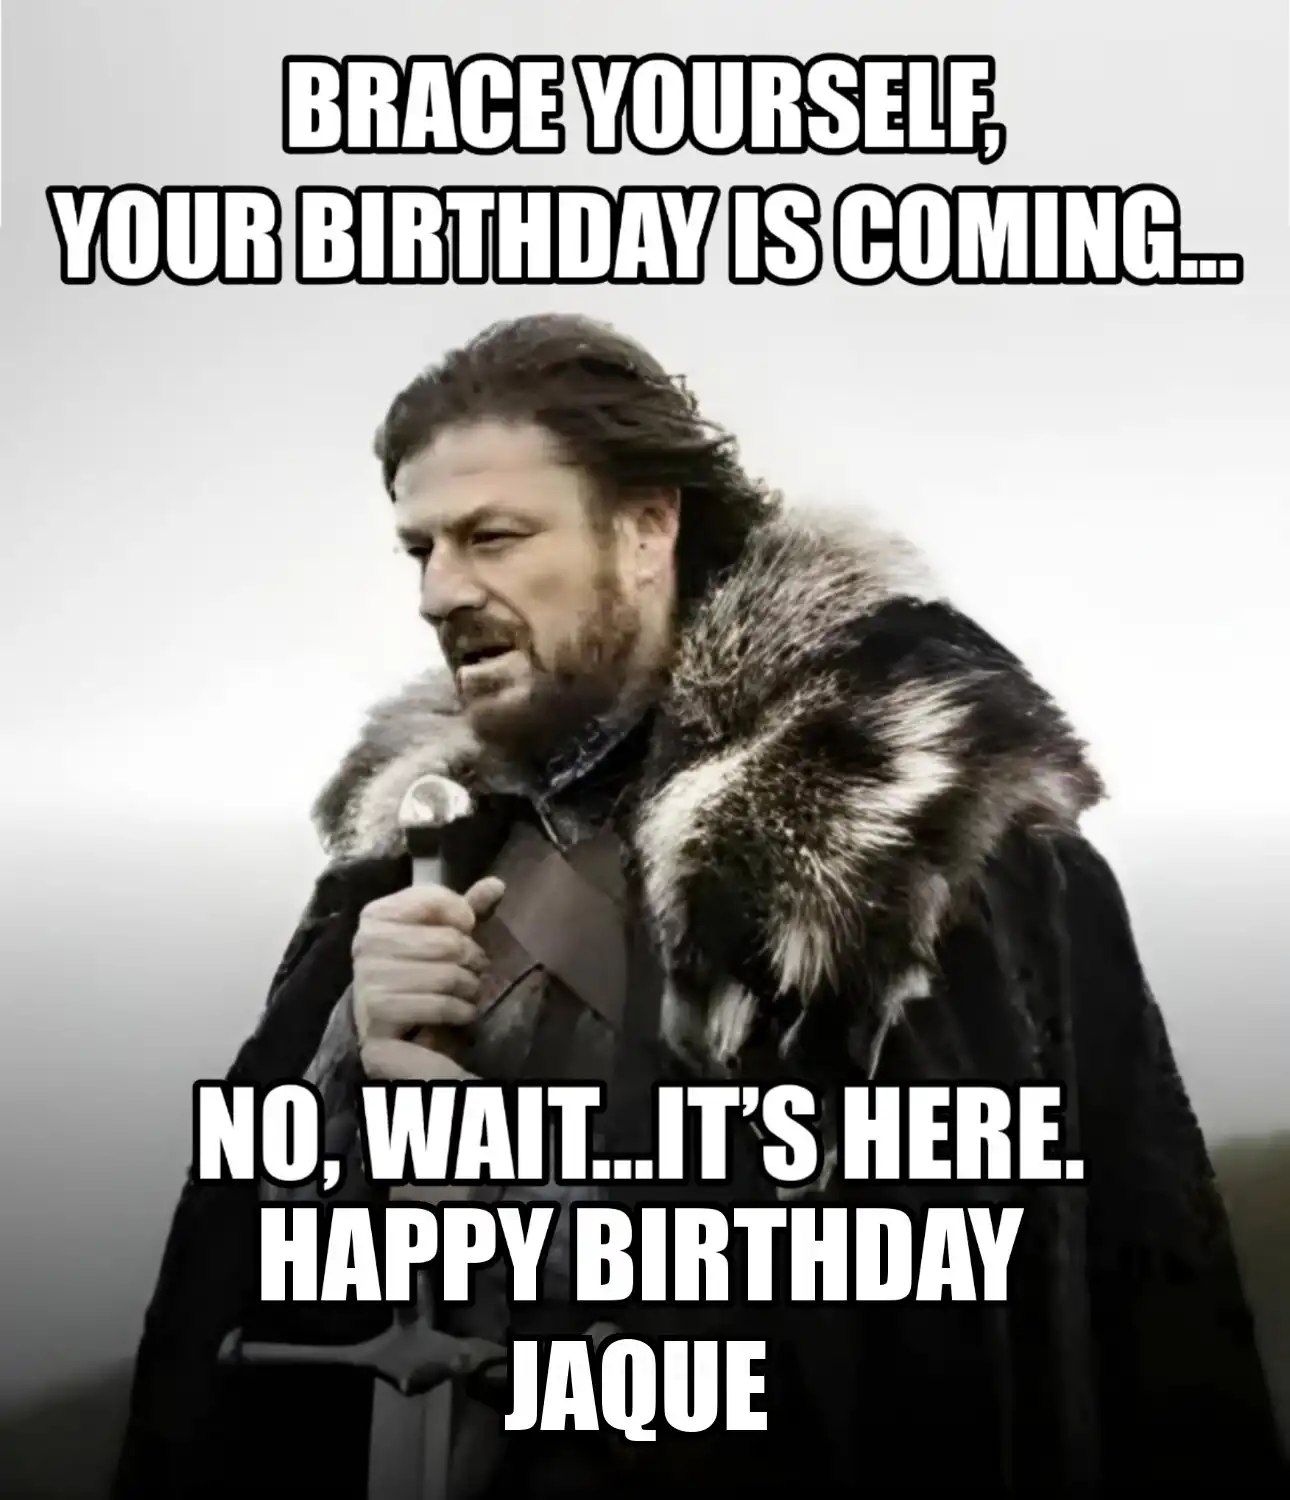 Happy Birthday Jaque Brace Yourself Your Birthday Is Coming Meme